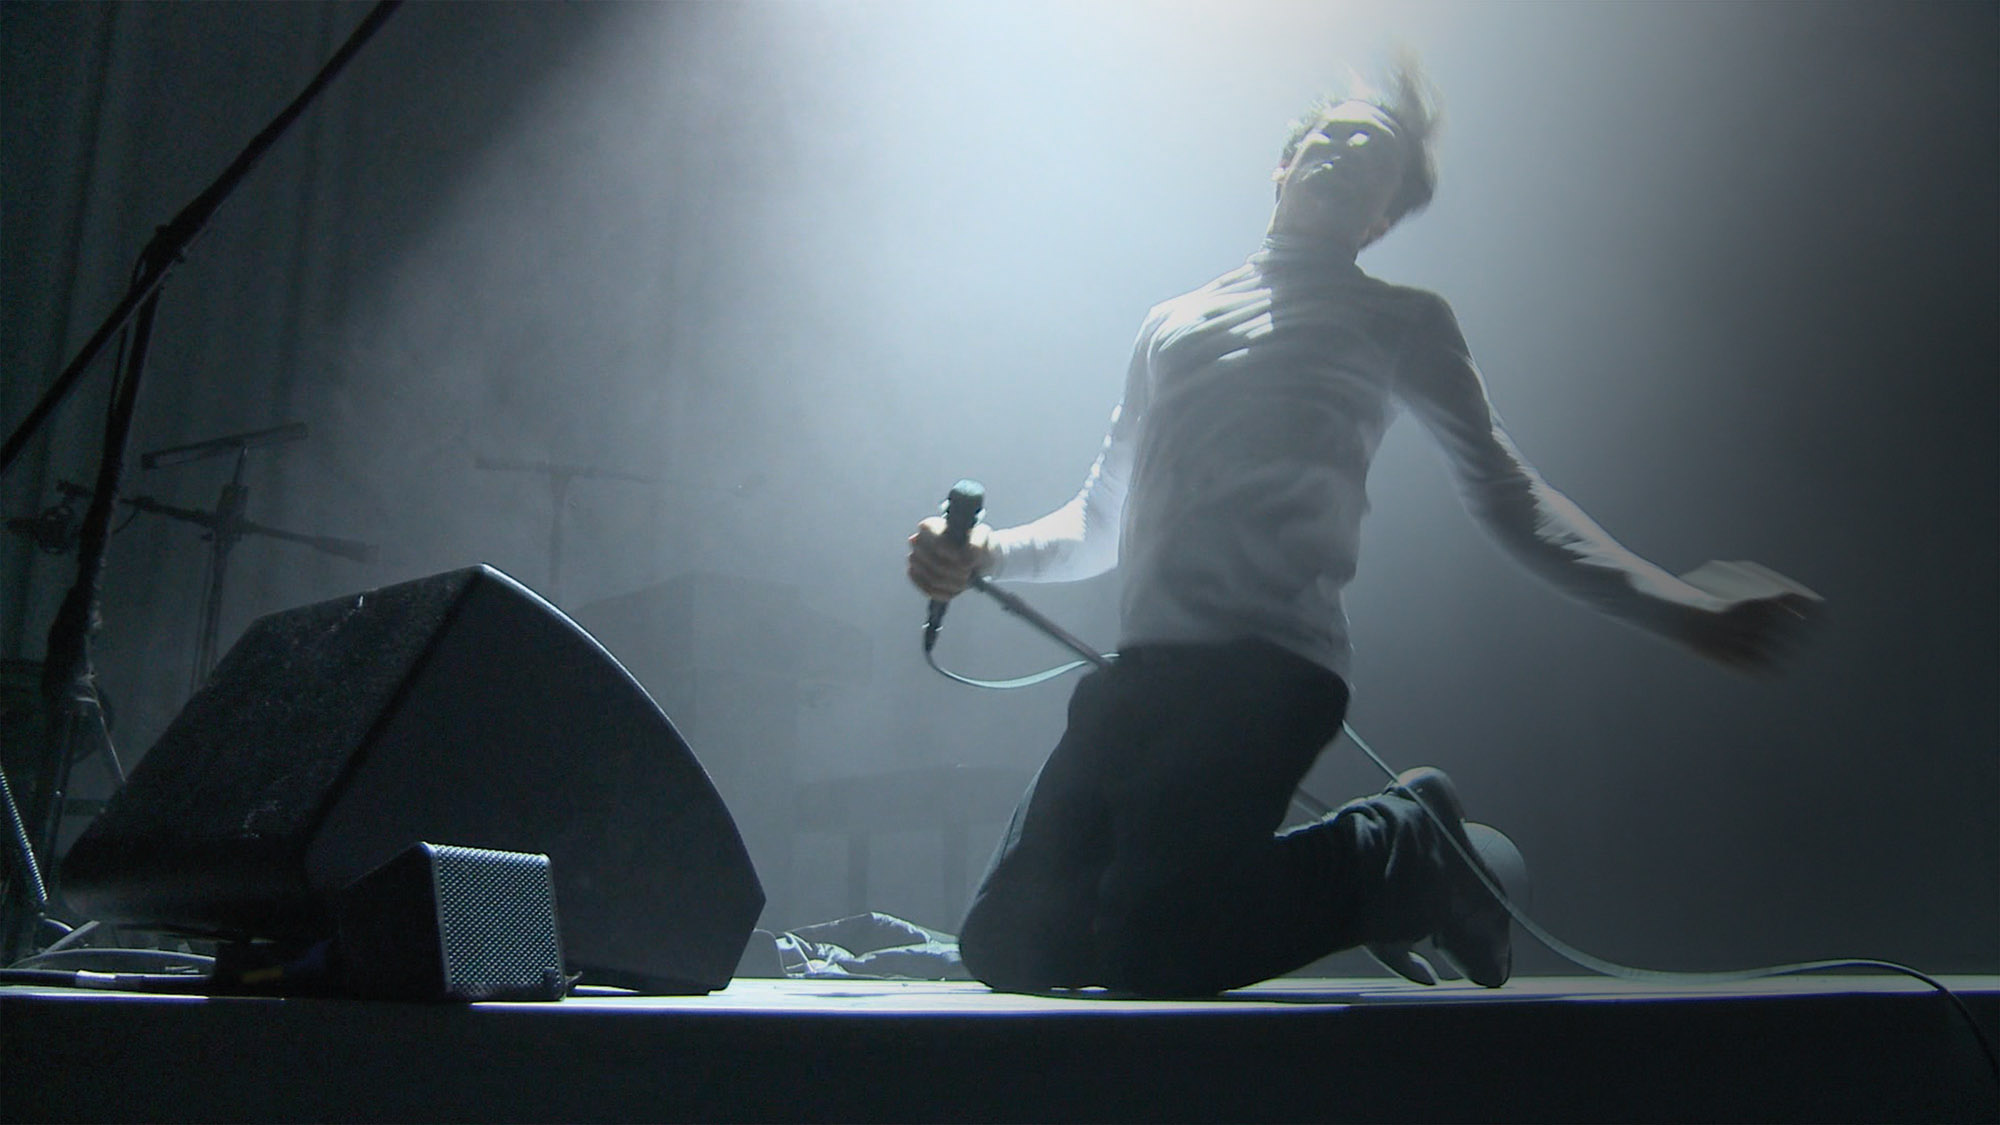 frances starlite holding a microhpone sliding on his knees to the end of the stage in light theatrical fog. 